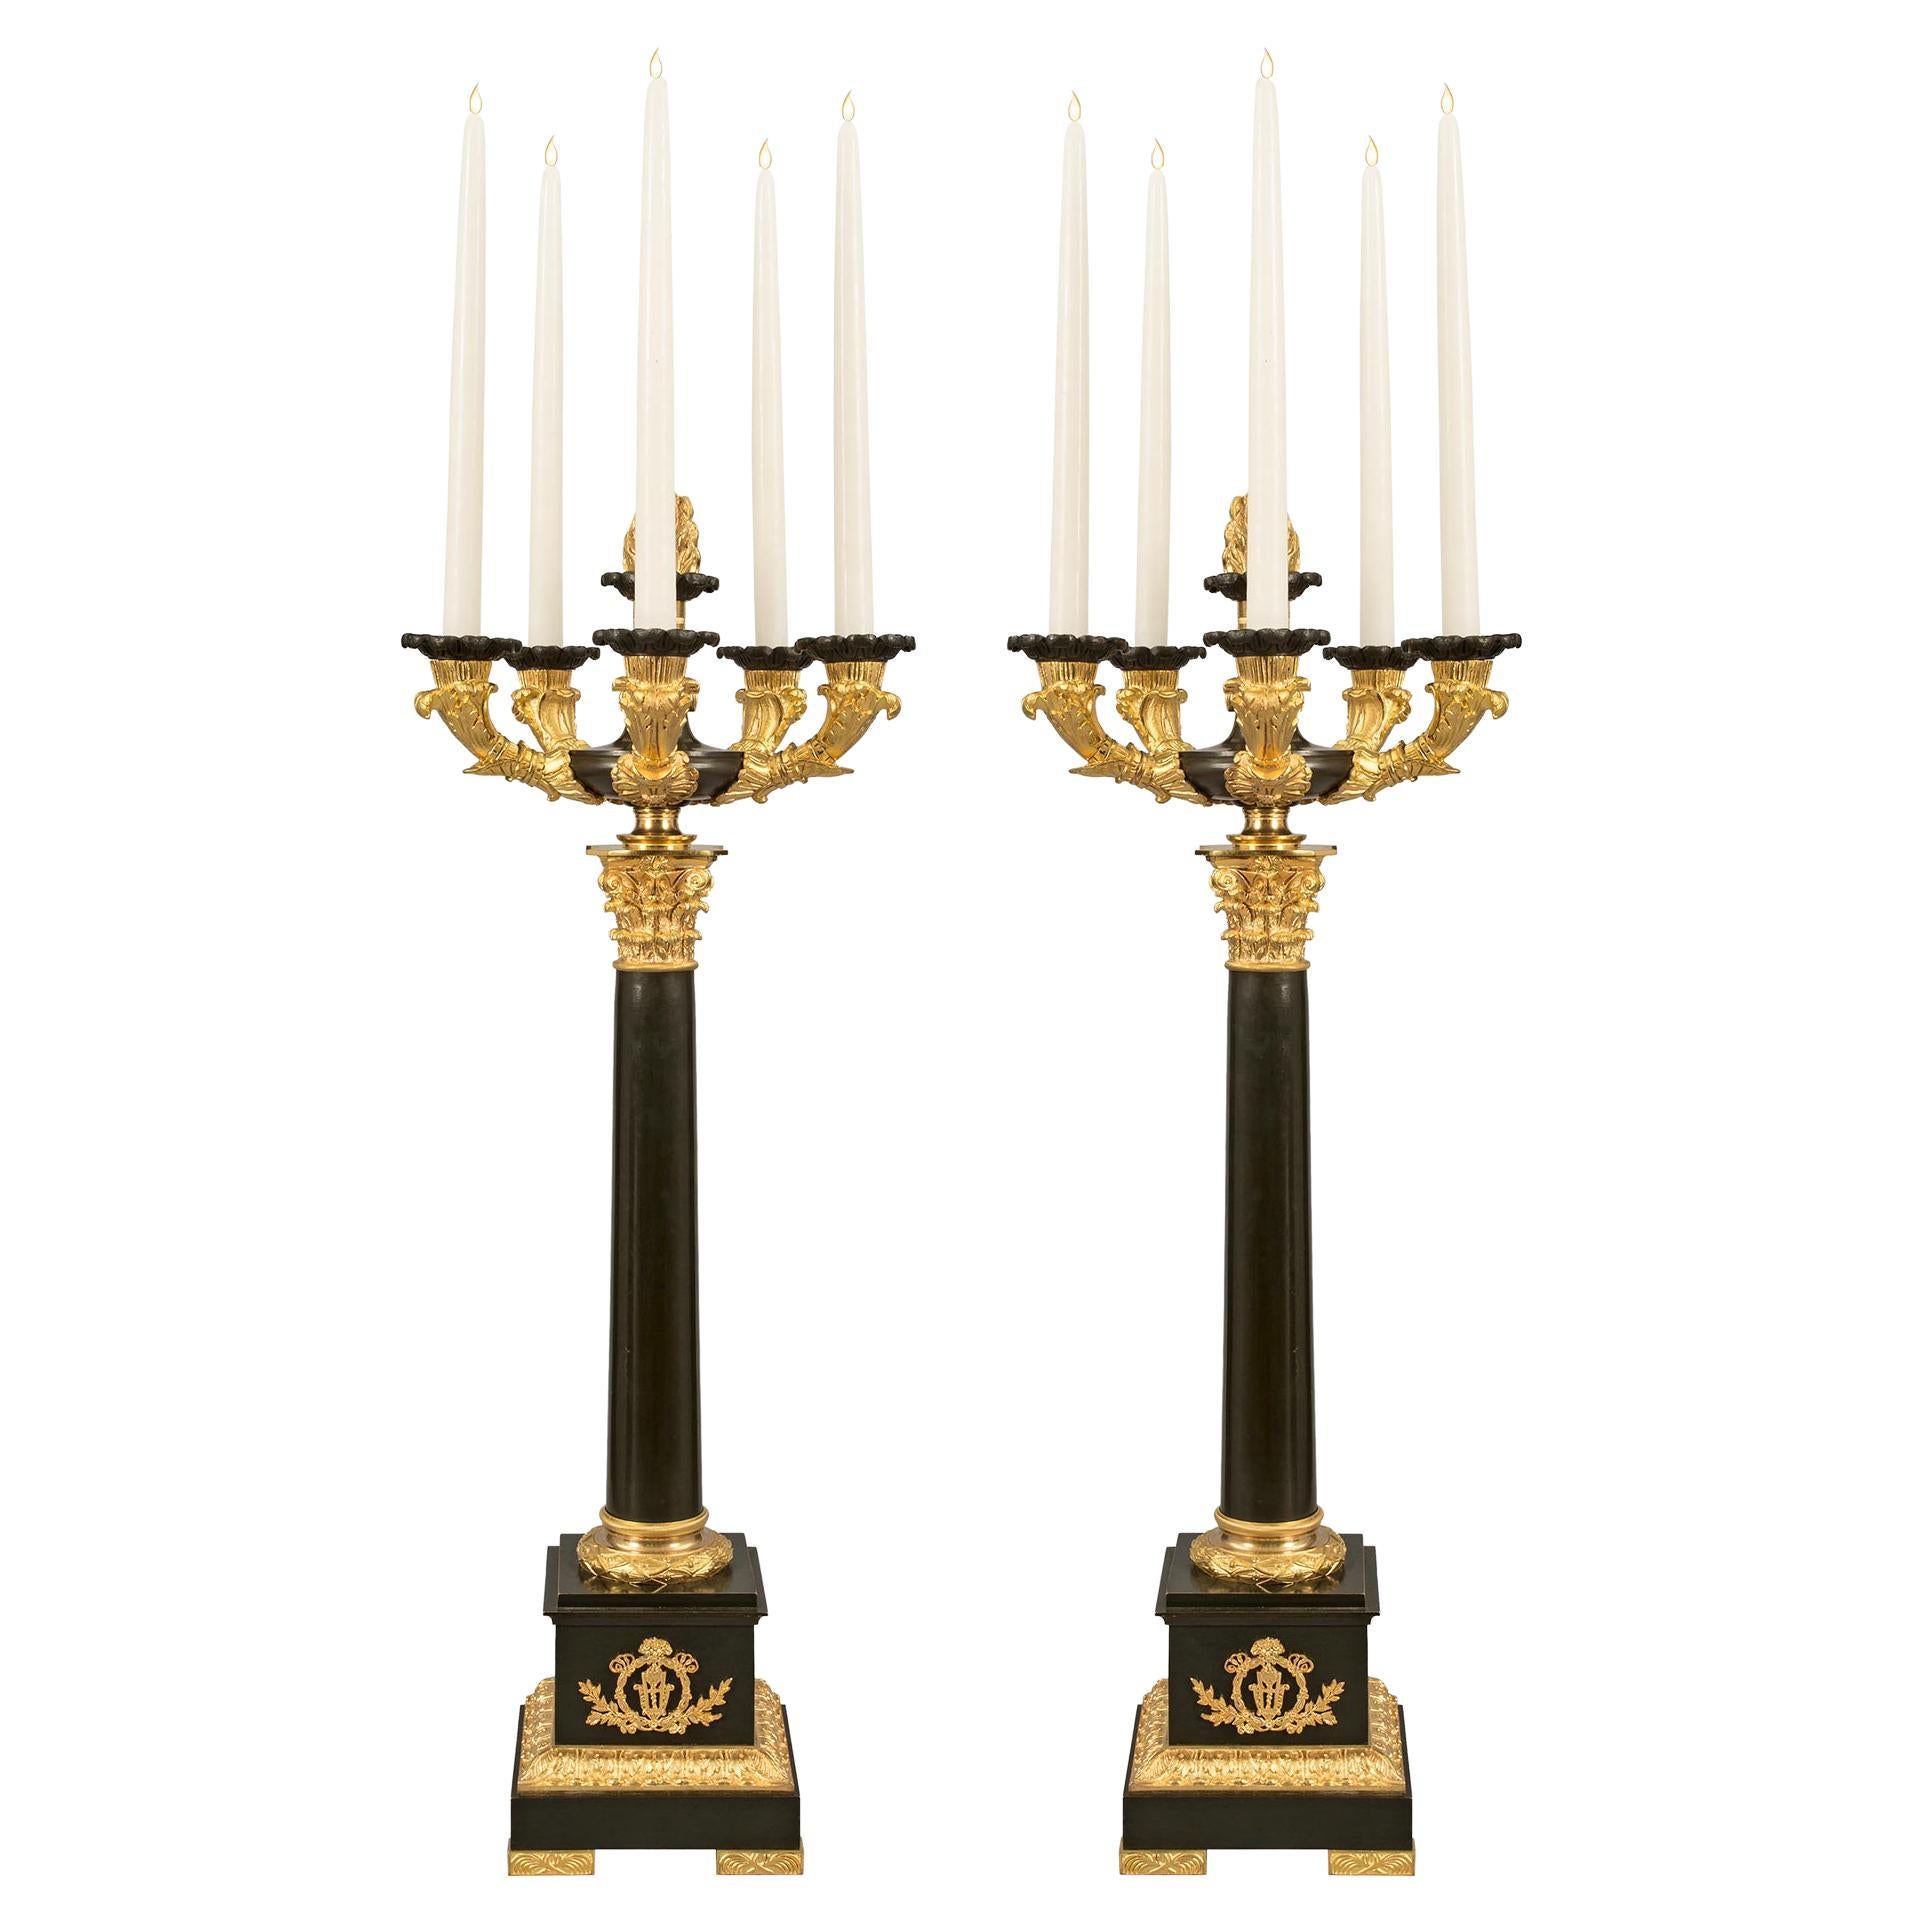 Pair of French Mid-19th Century Empire St. Patinated Bronze & Ormolu Candelabra